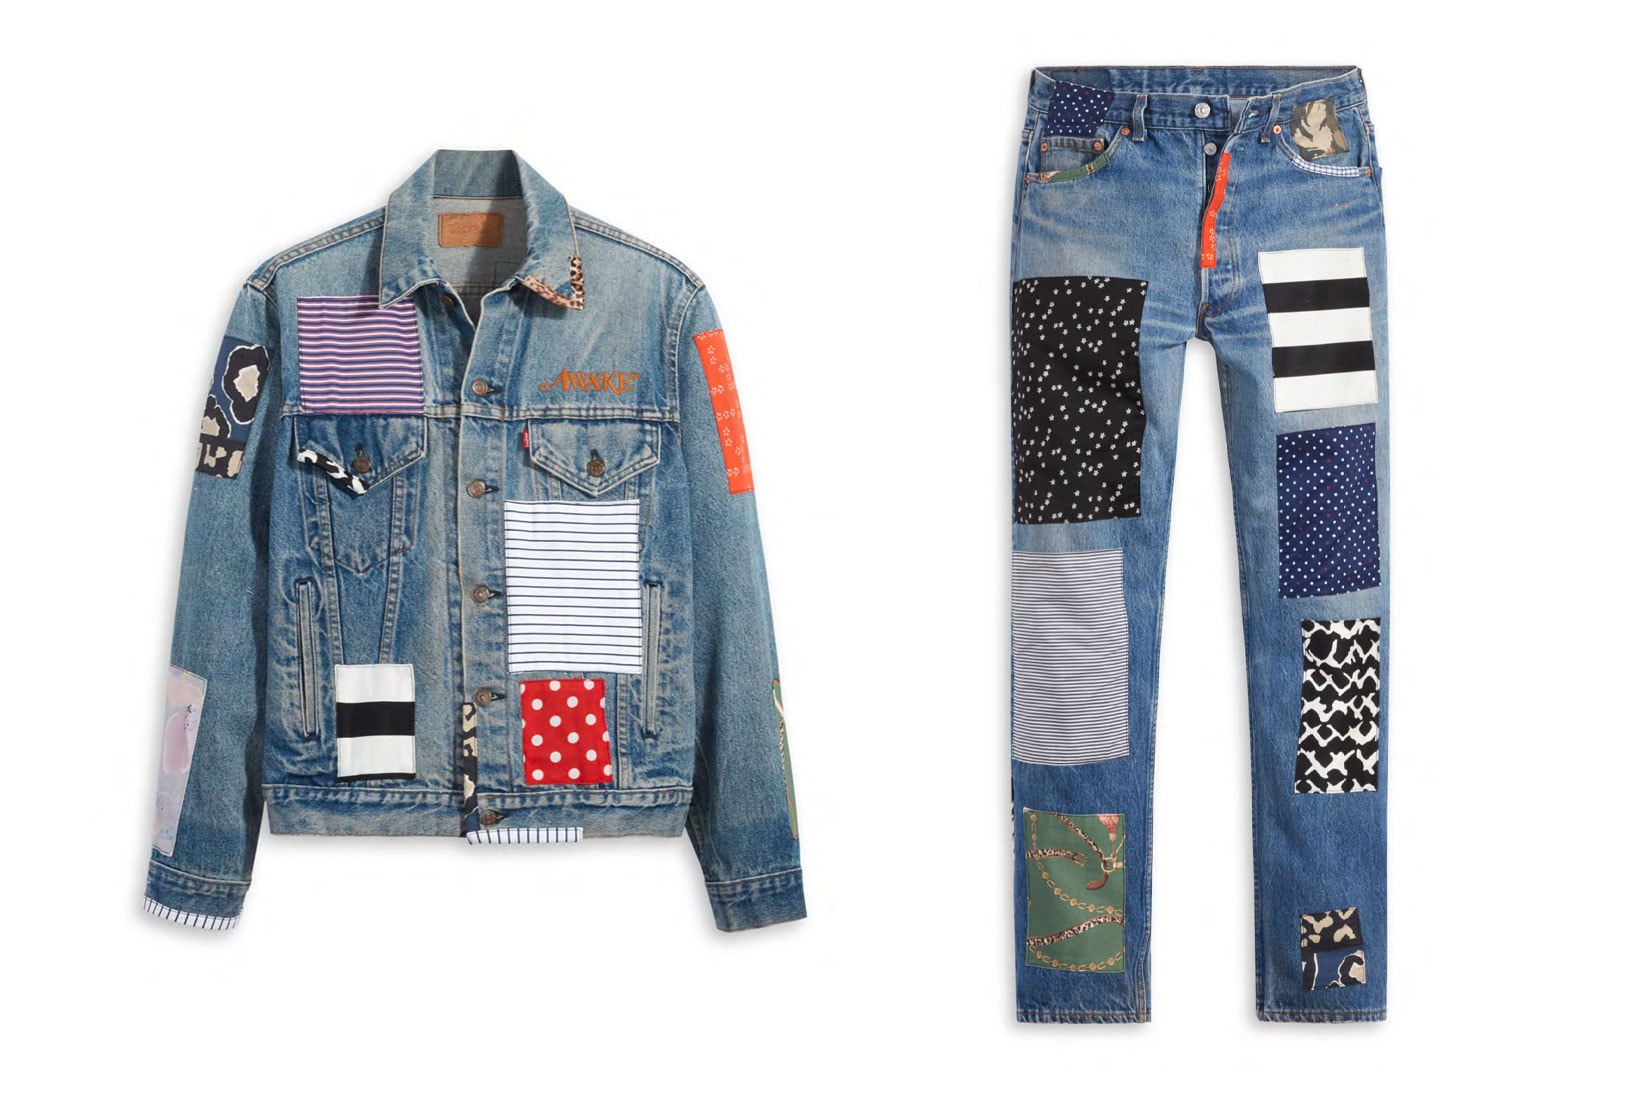 awake ny levis denim jeans 501 type iii truckers collaboration patchworked vintage patterns release